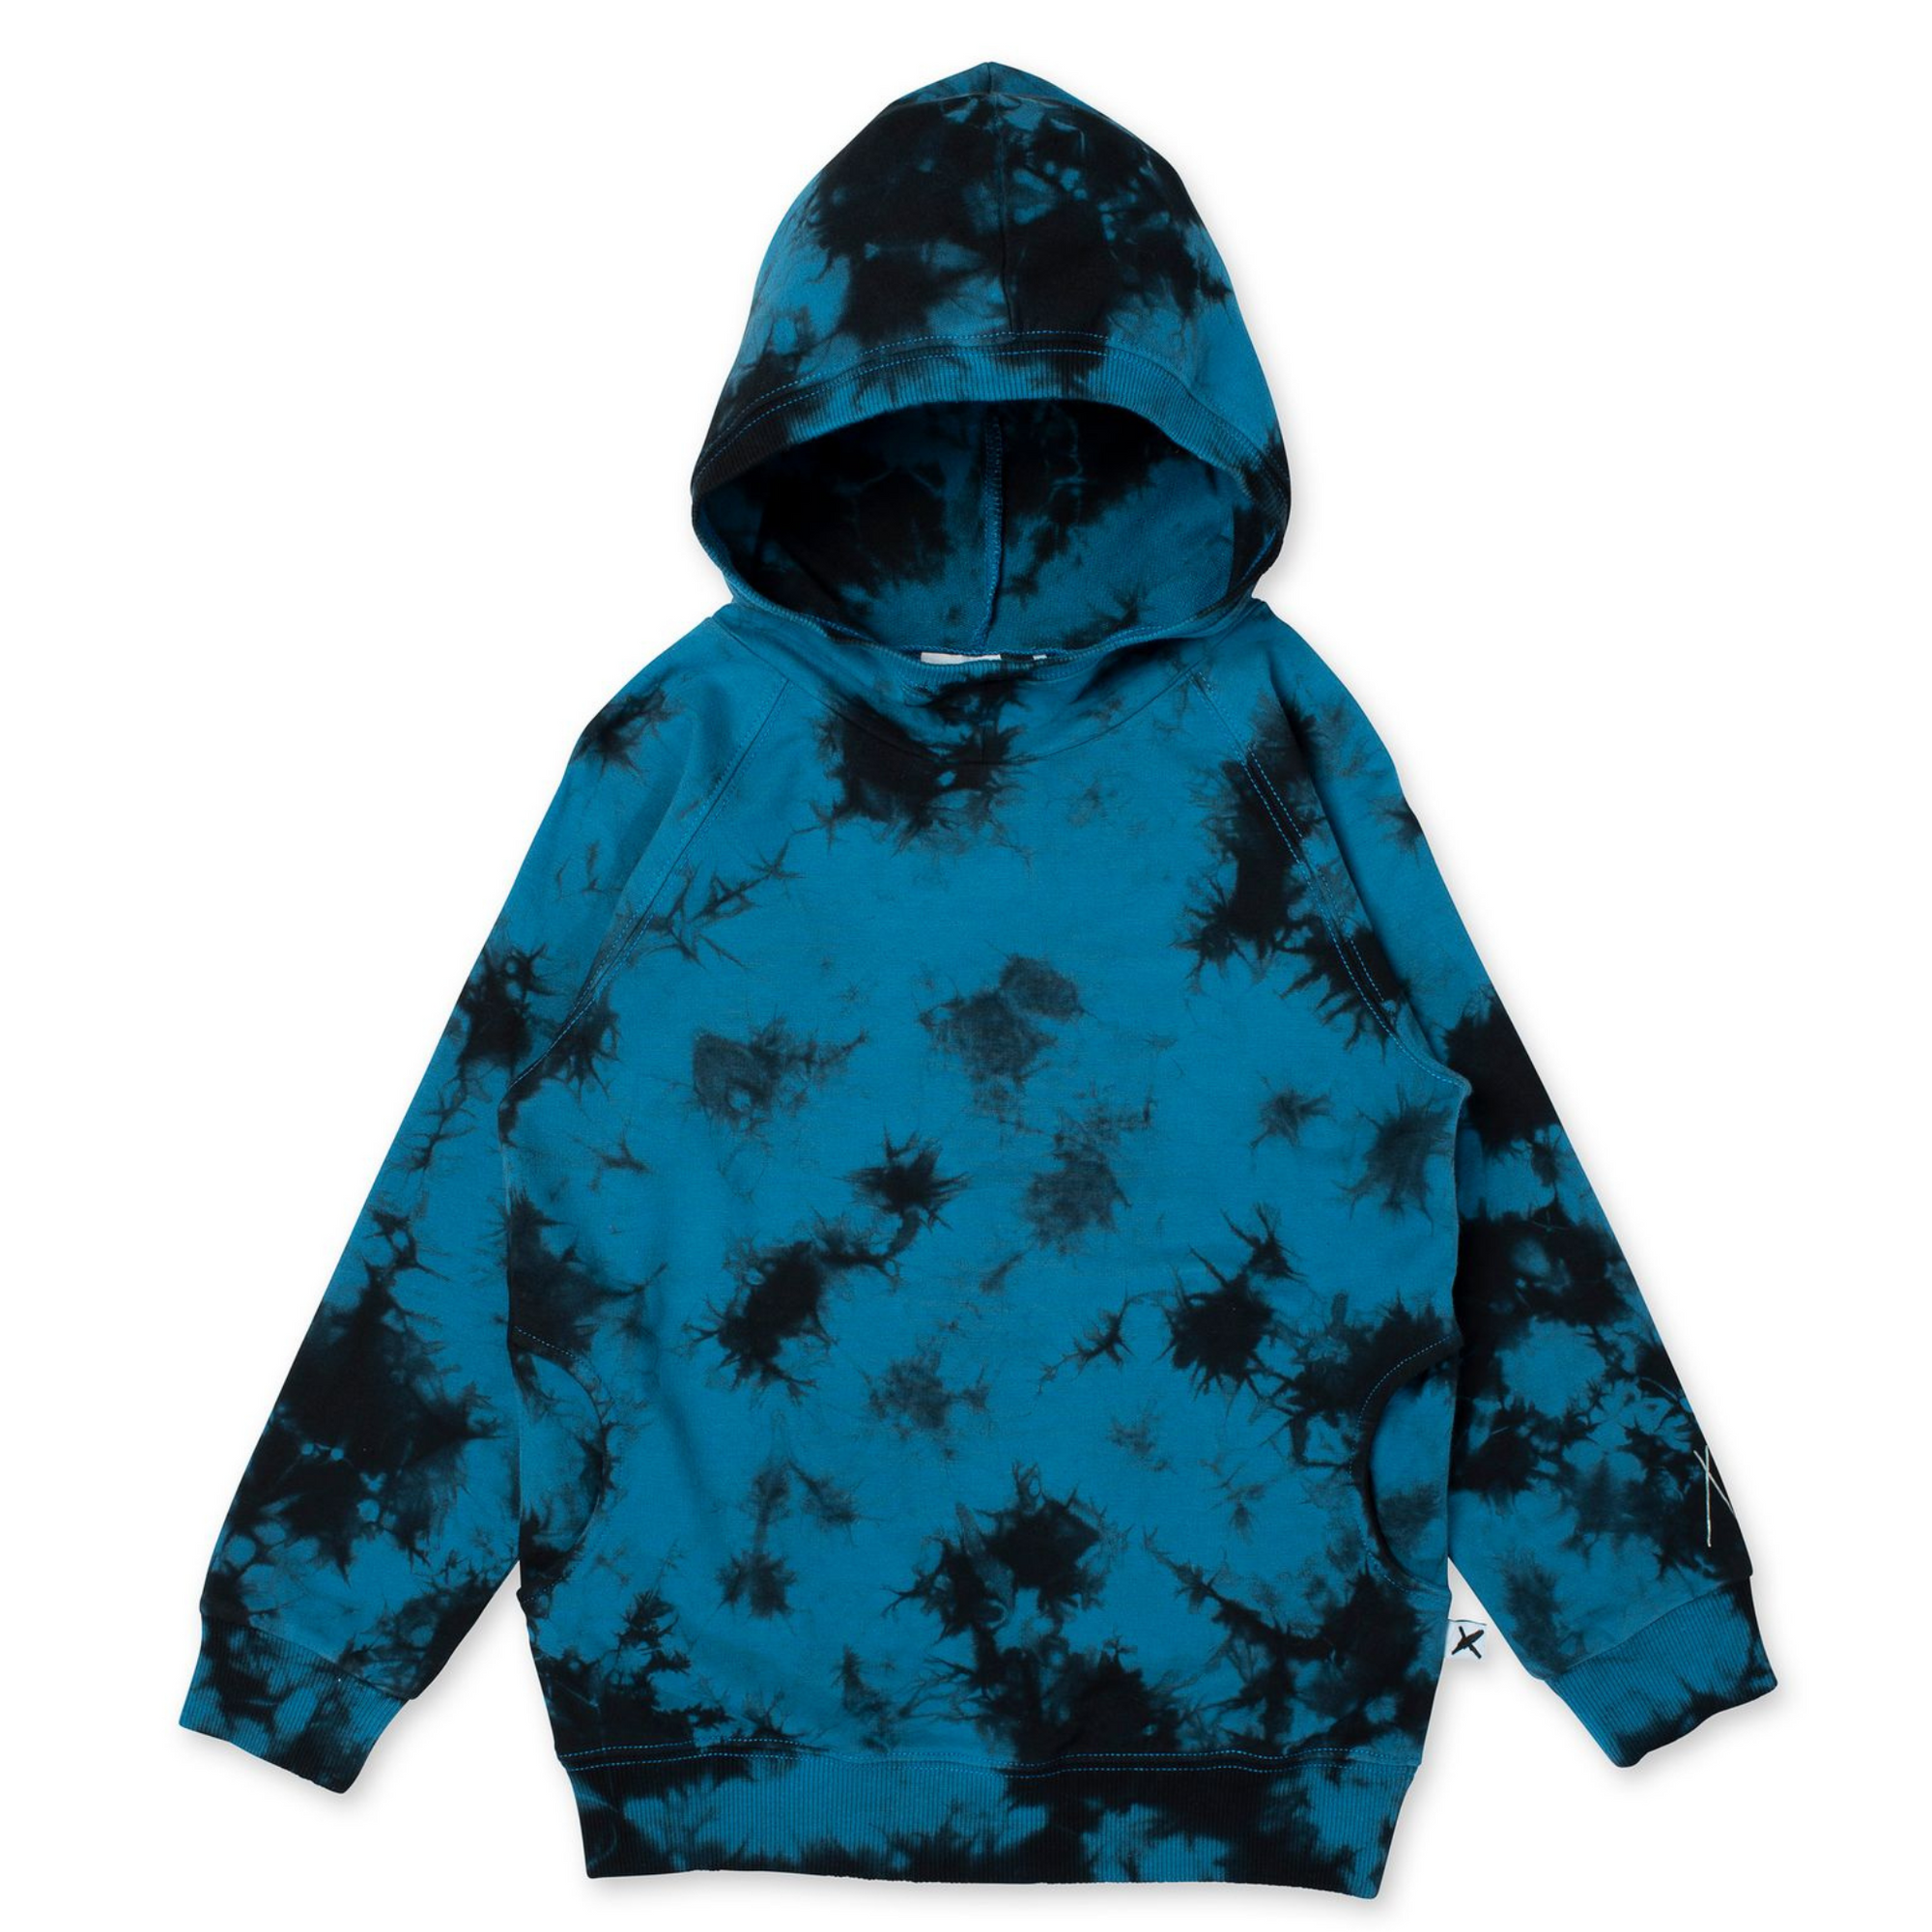 Minti Scattered Hood  - Electric Blue